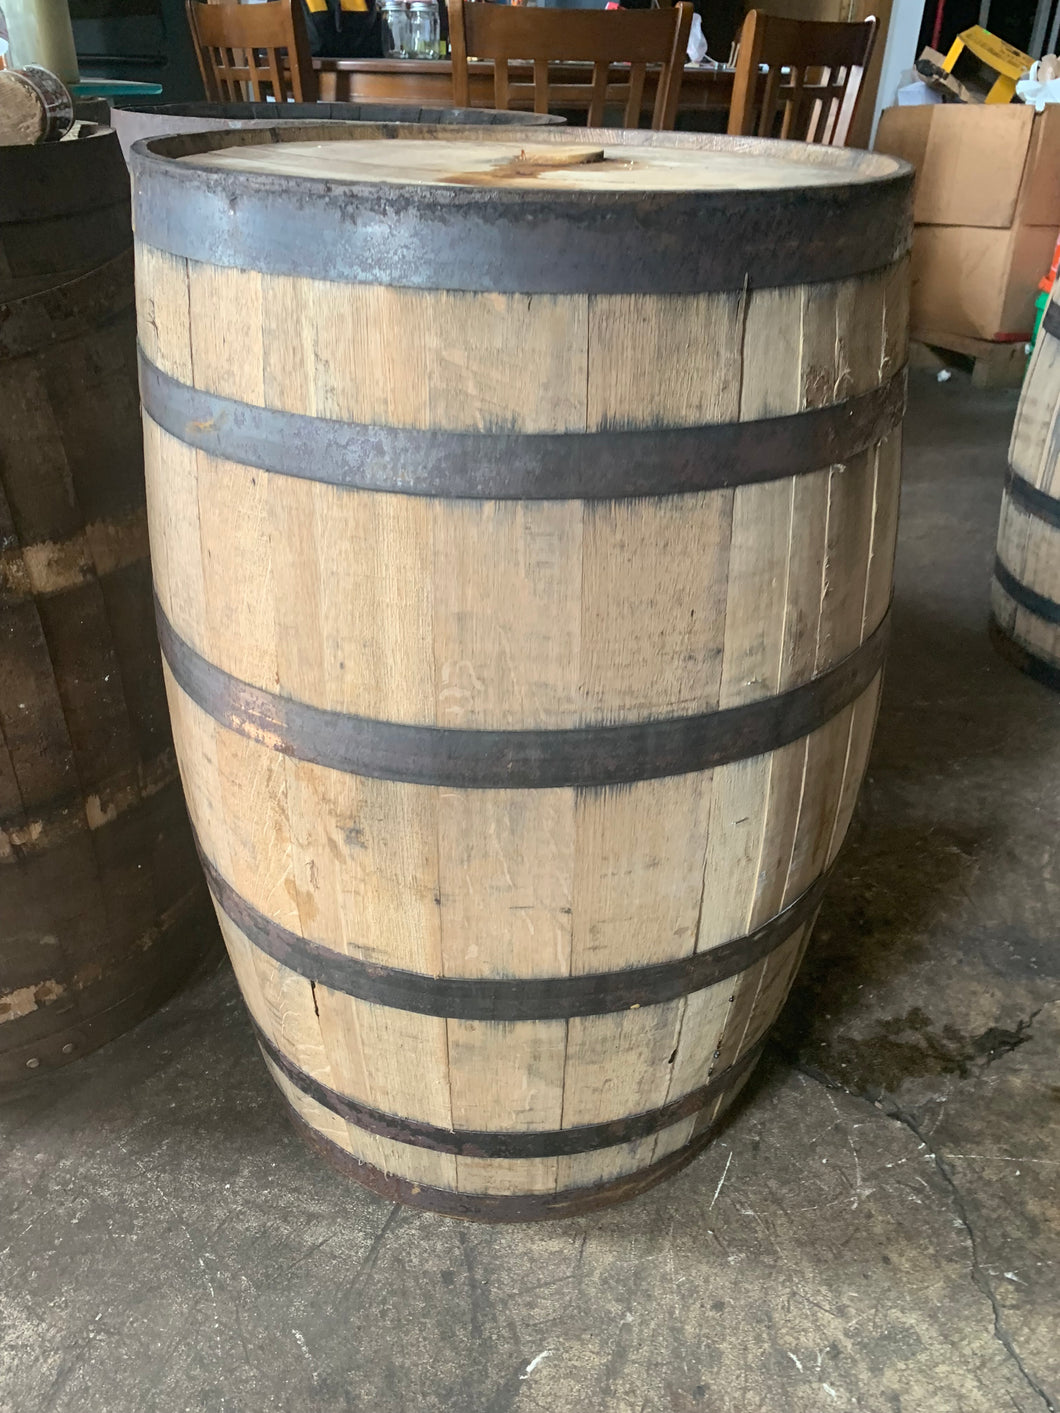 Sale 53g super clean and nice Bourbon barrels with 1 head bung. Less than 3 years old. Used for aging beer.